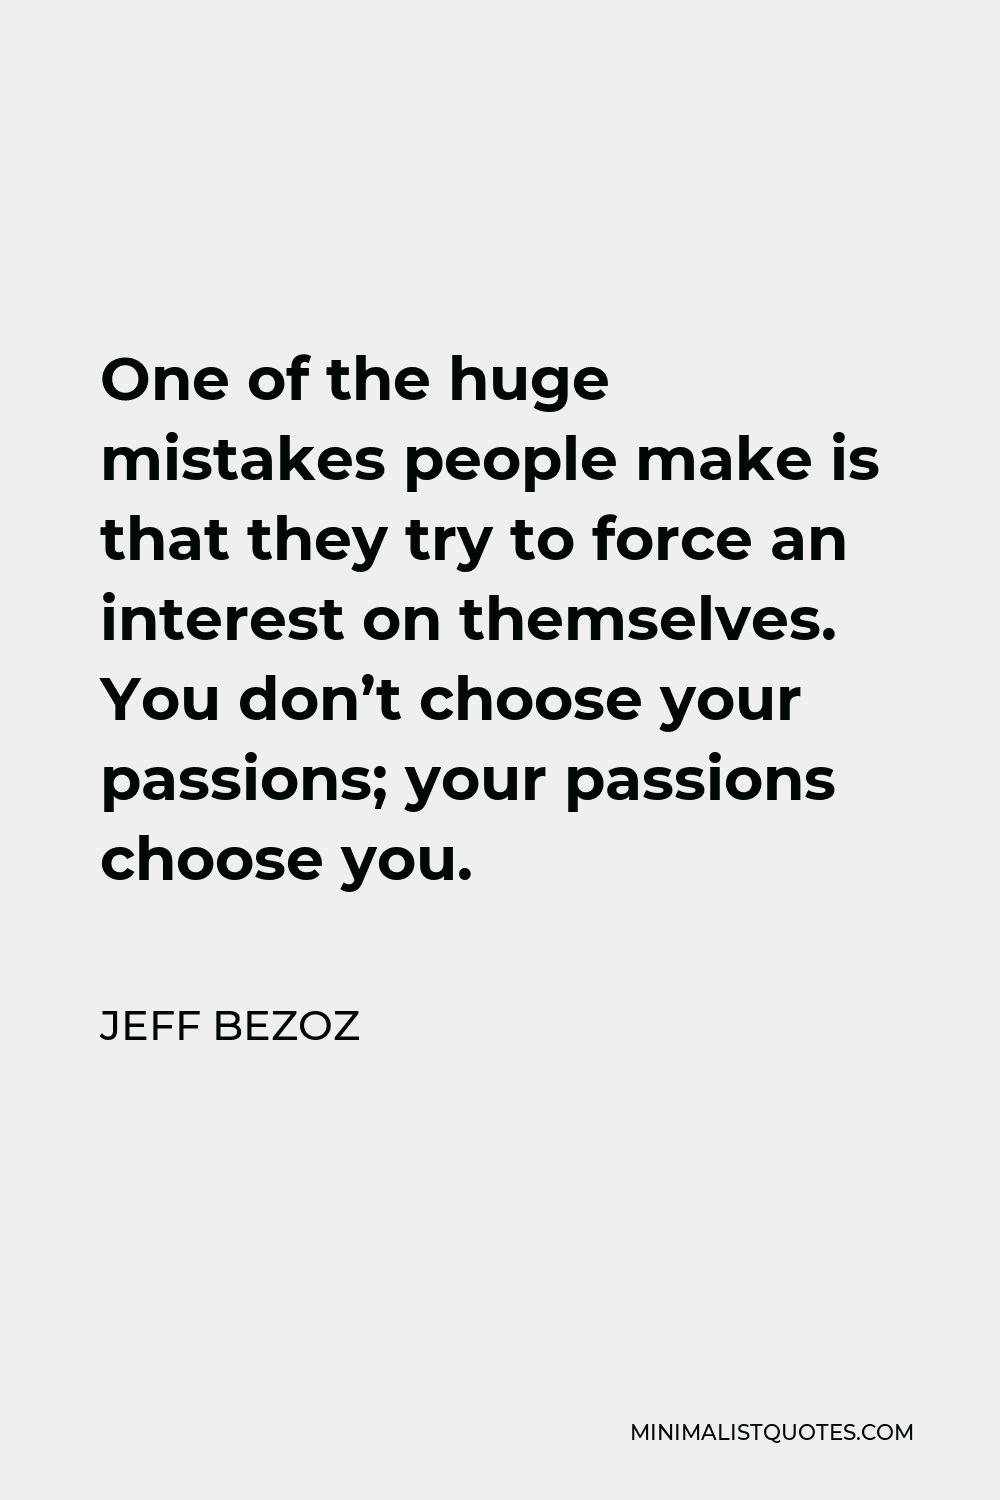 Jeff Bezoz Quote - One of the huge mistakes people make is that they try to force an interest on themselves. You don’t choose your passions; your passions choose you.